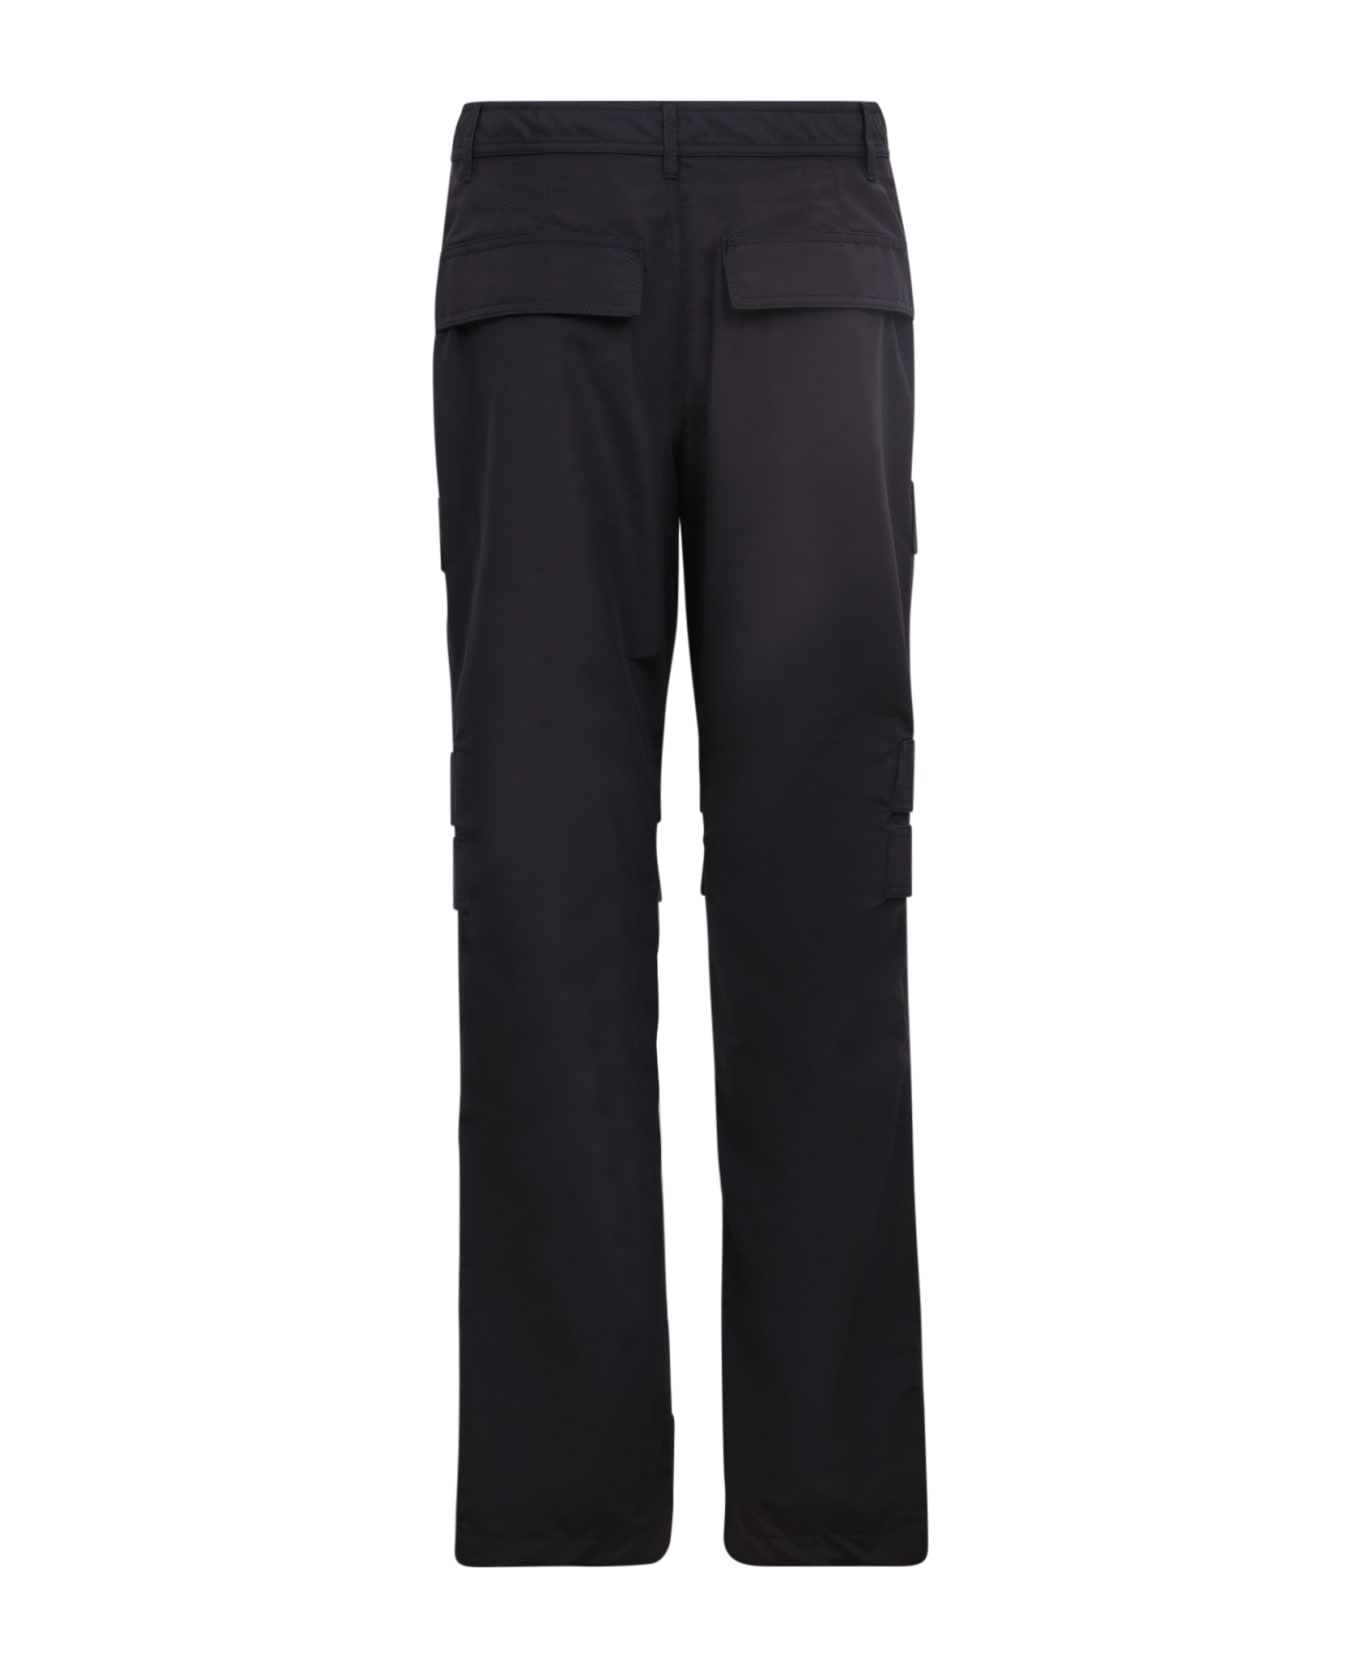 Burberry Cargo Trousers - Black ボトムス